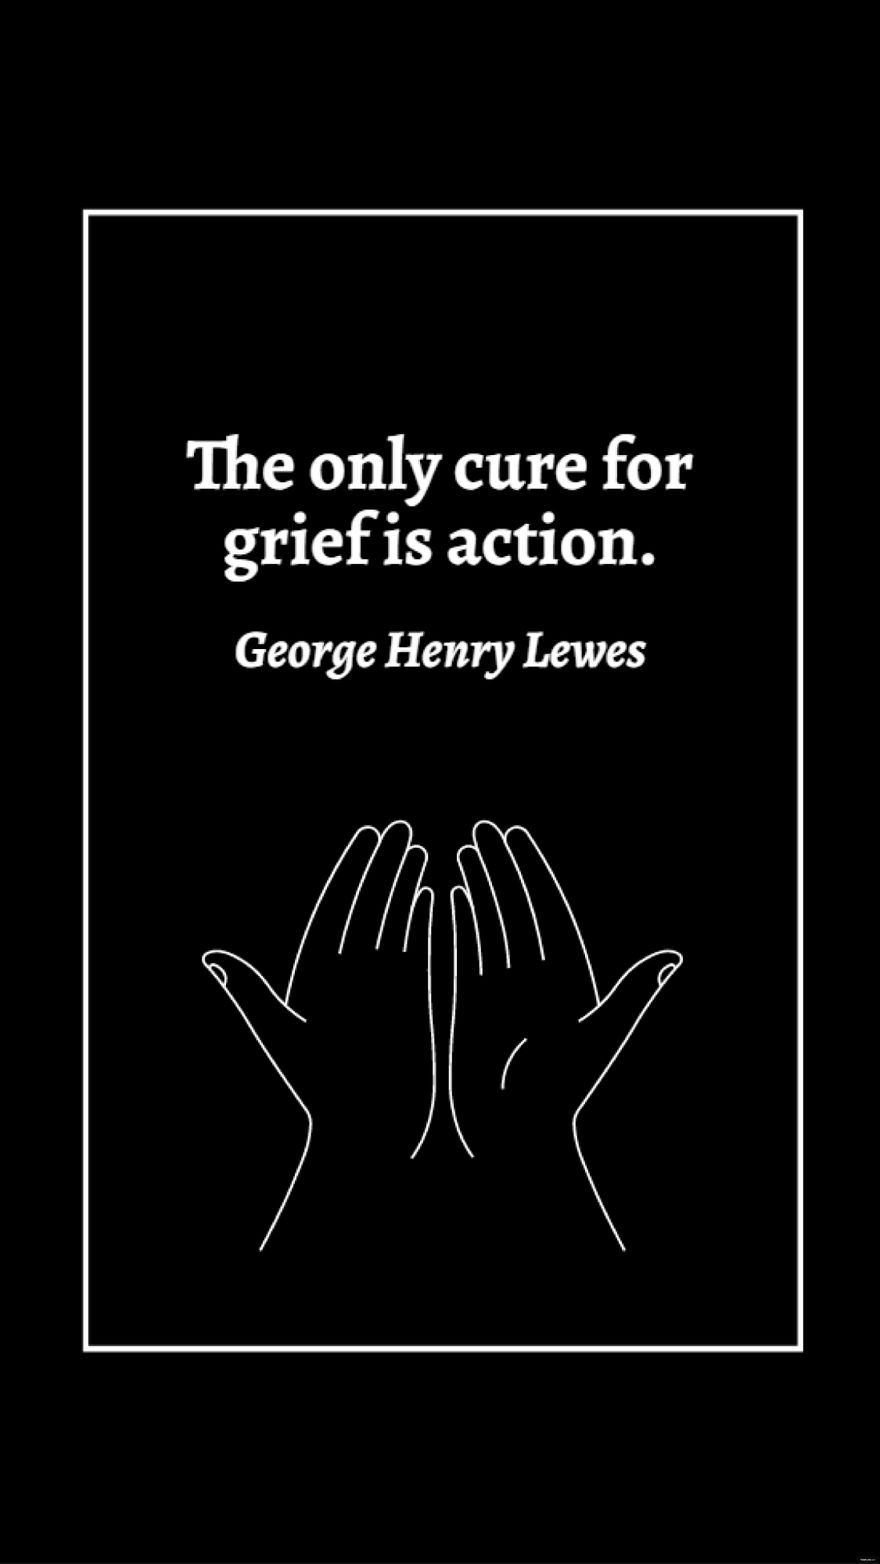 George Henry Lewes - The only cure for grief is action.